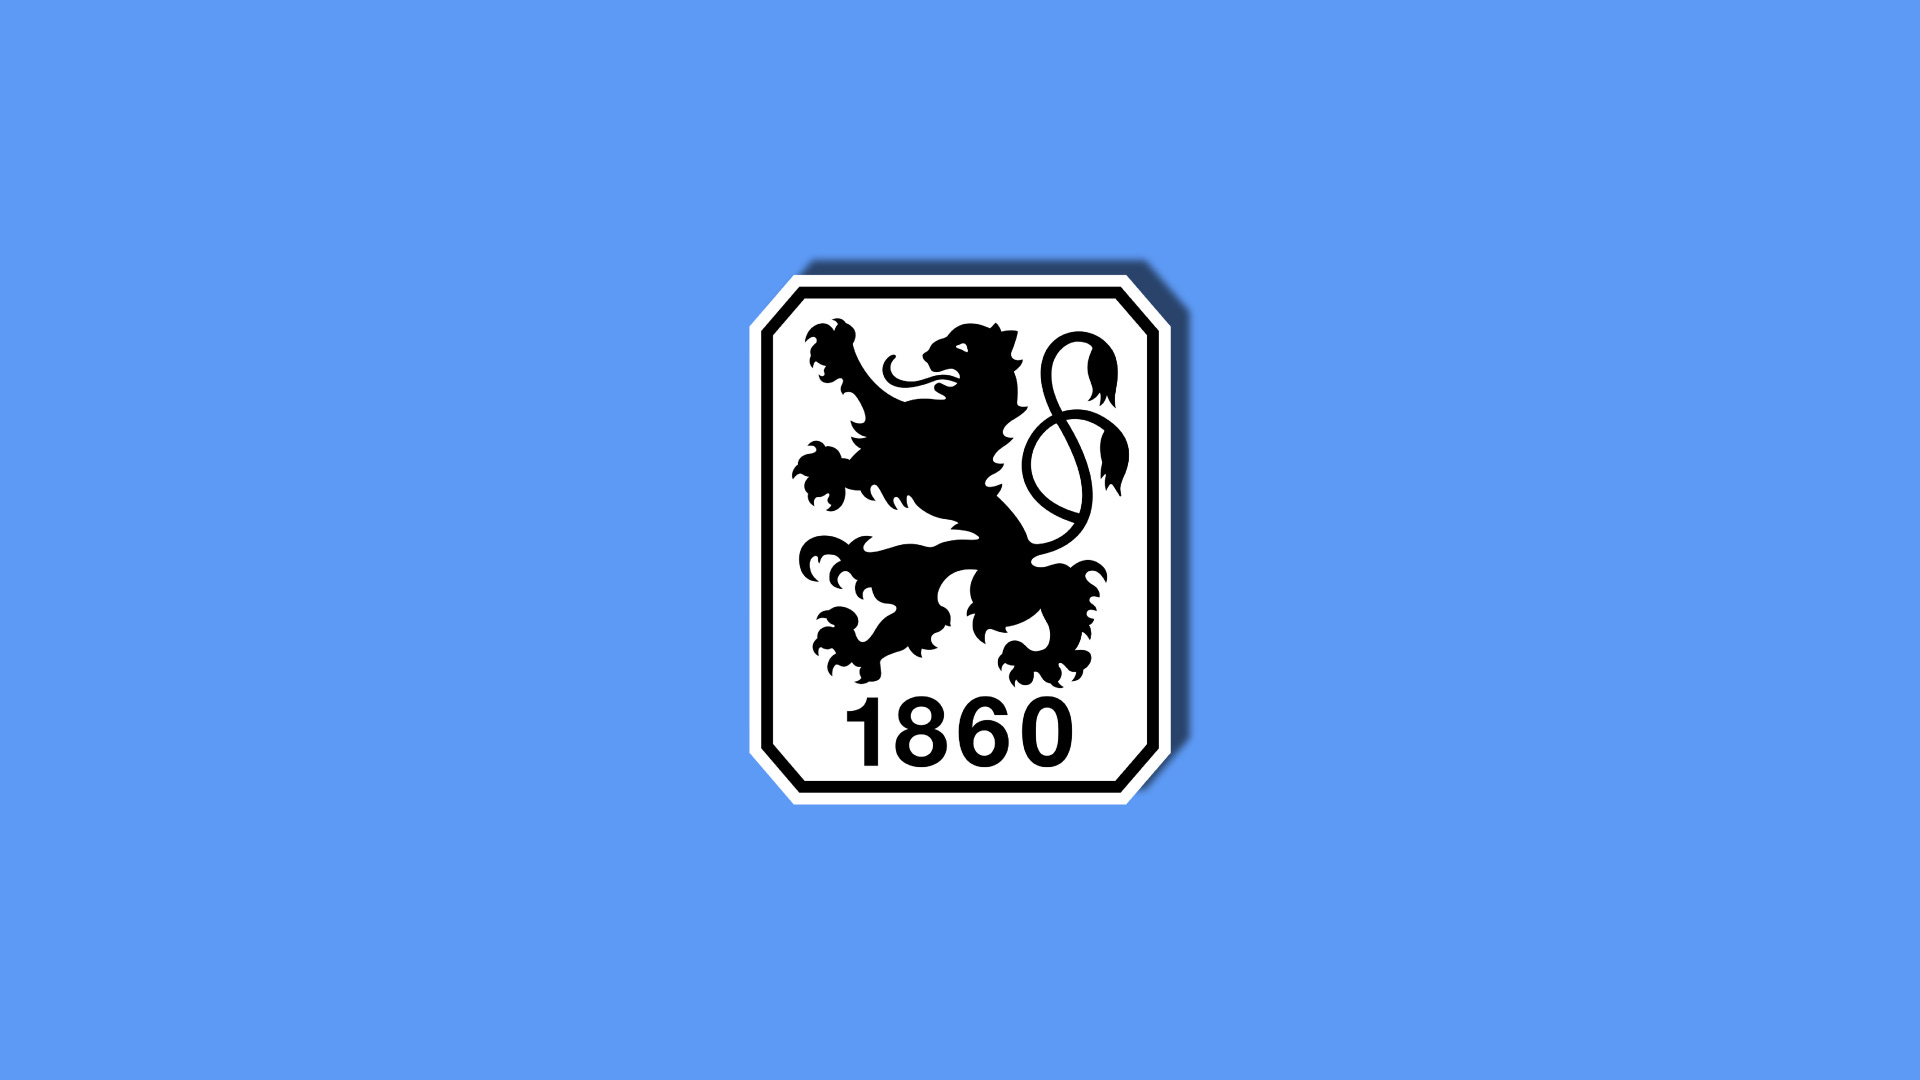 The spectacular rise and fall of 1860 Munich